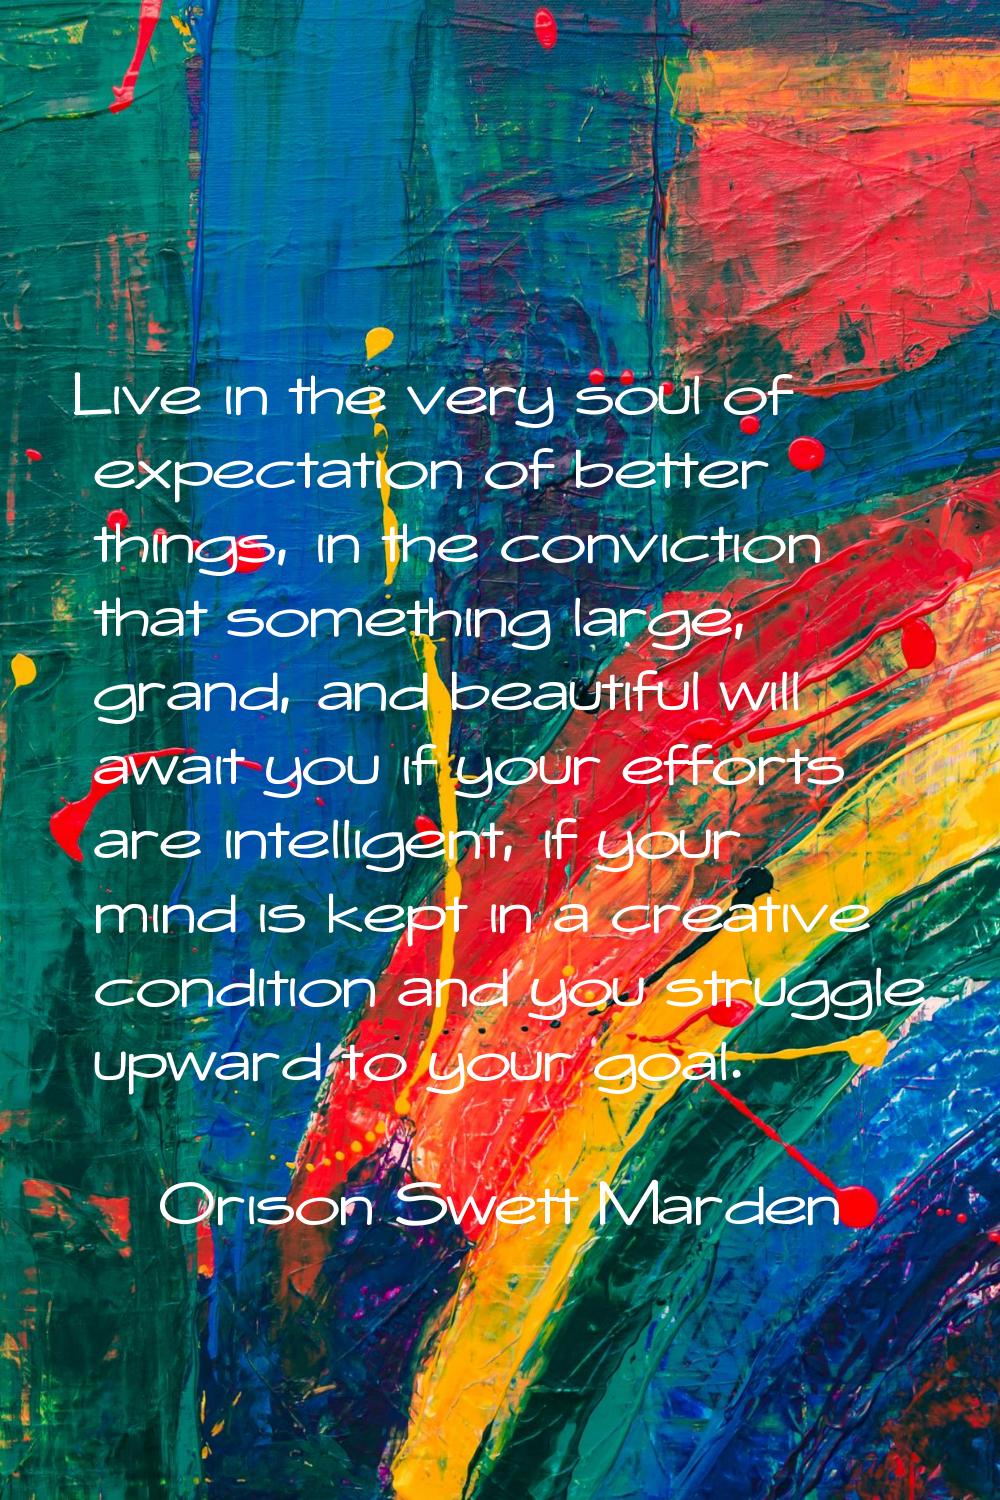 Live in the very soul of expectation of better things, in the conviction that something large, gran